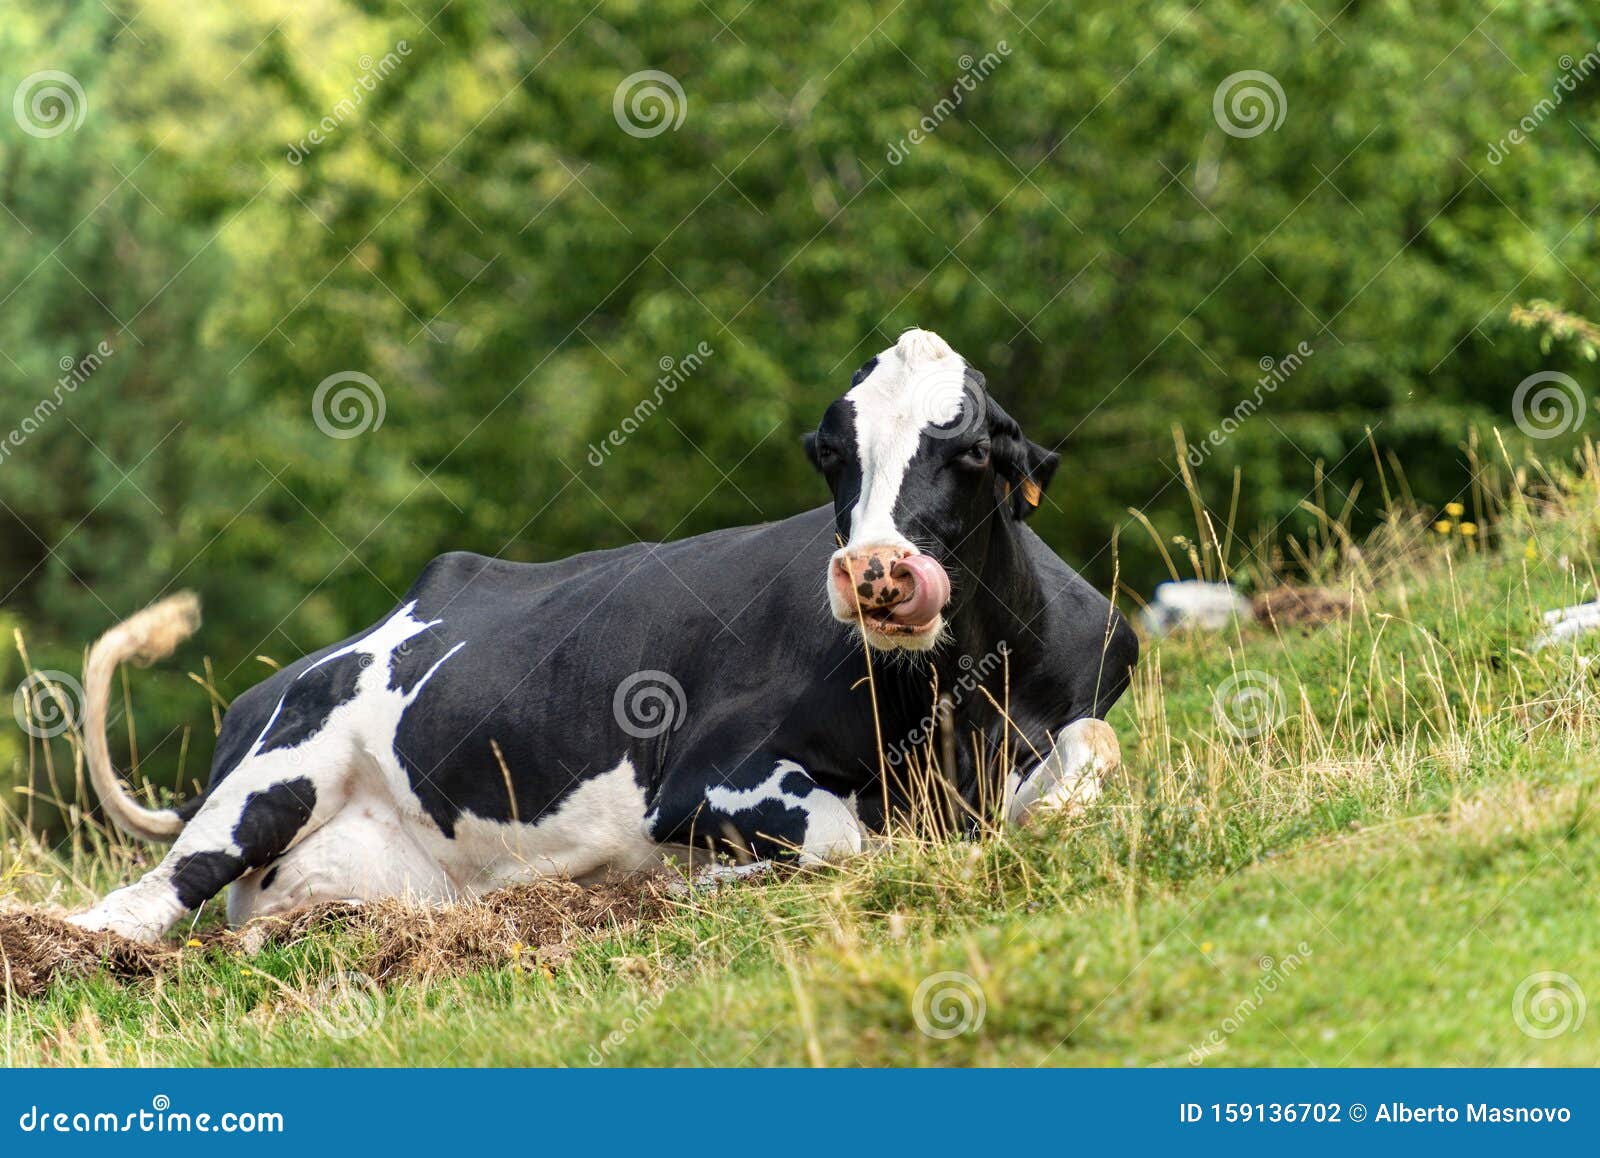 Dairy Cow Relaxing in the Grass - Italian Alps Stock Photo - Image of ...